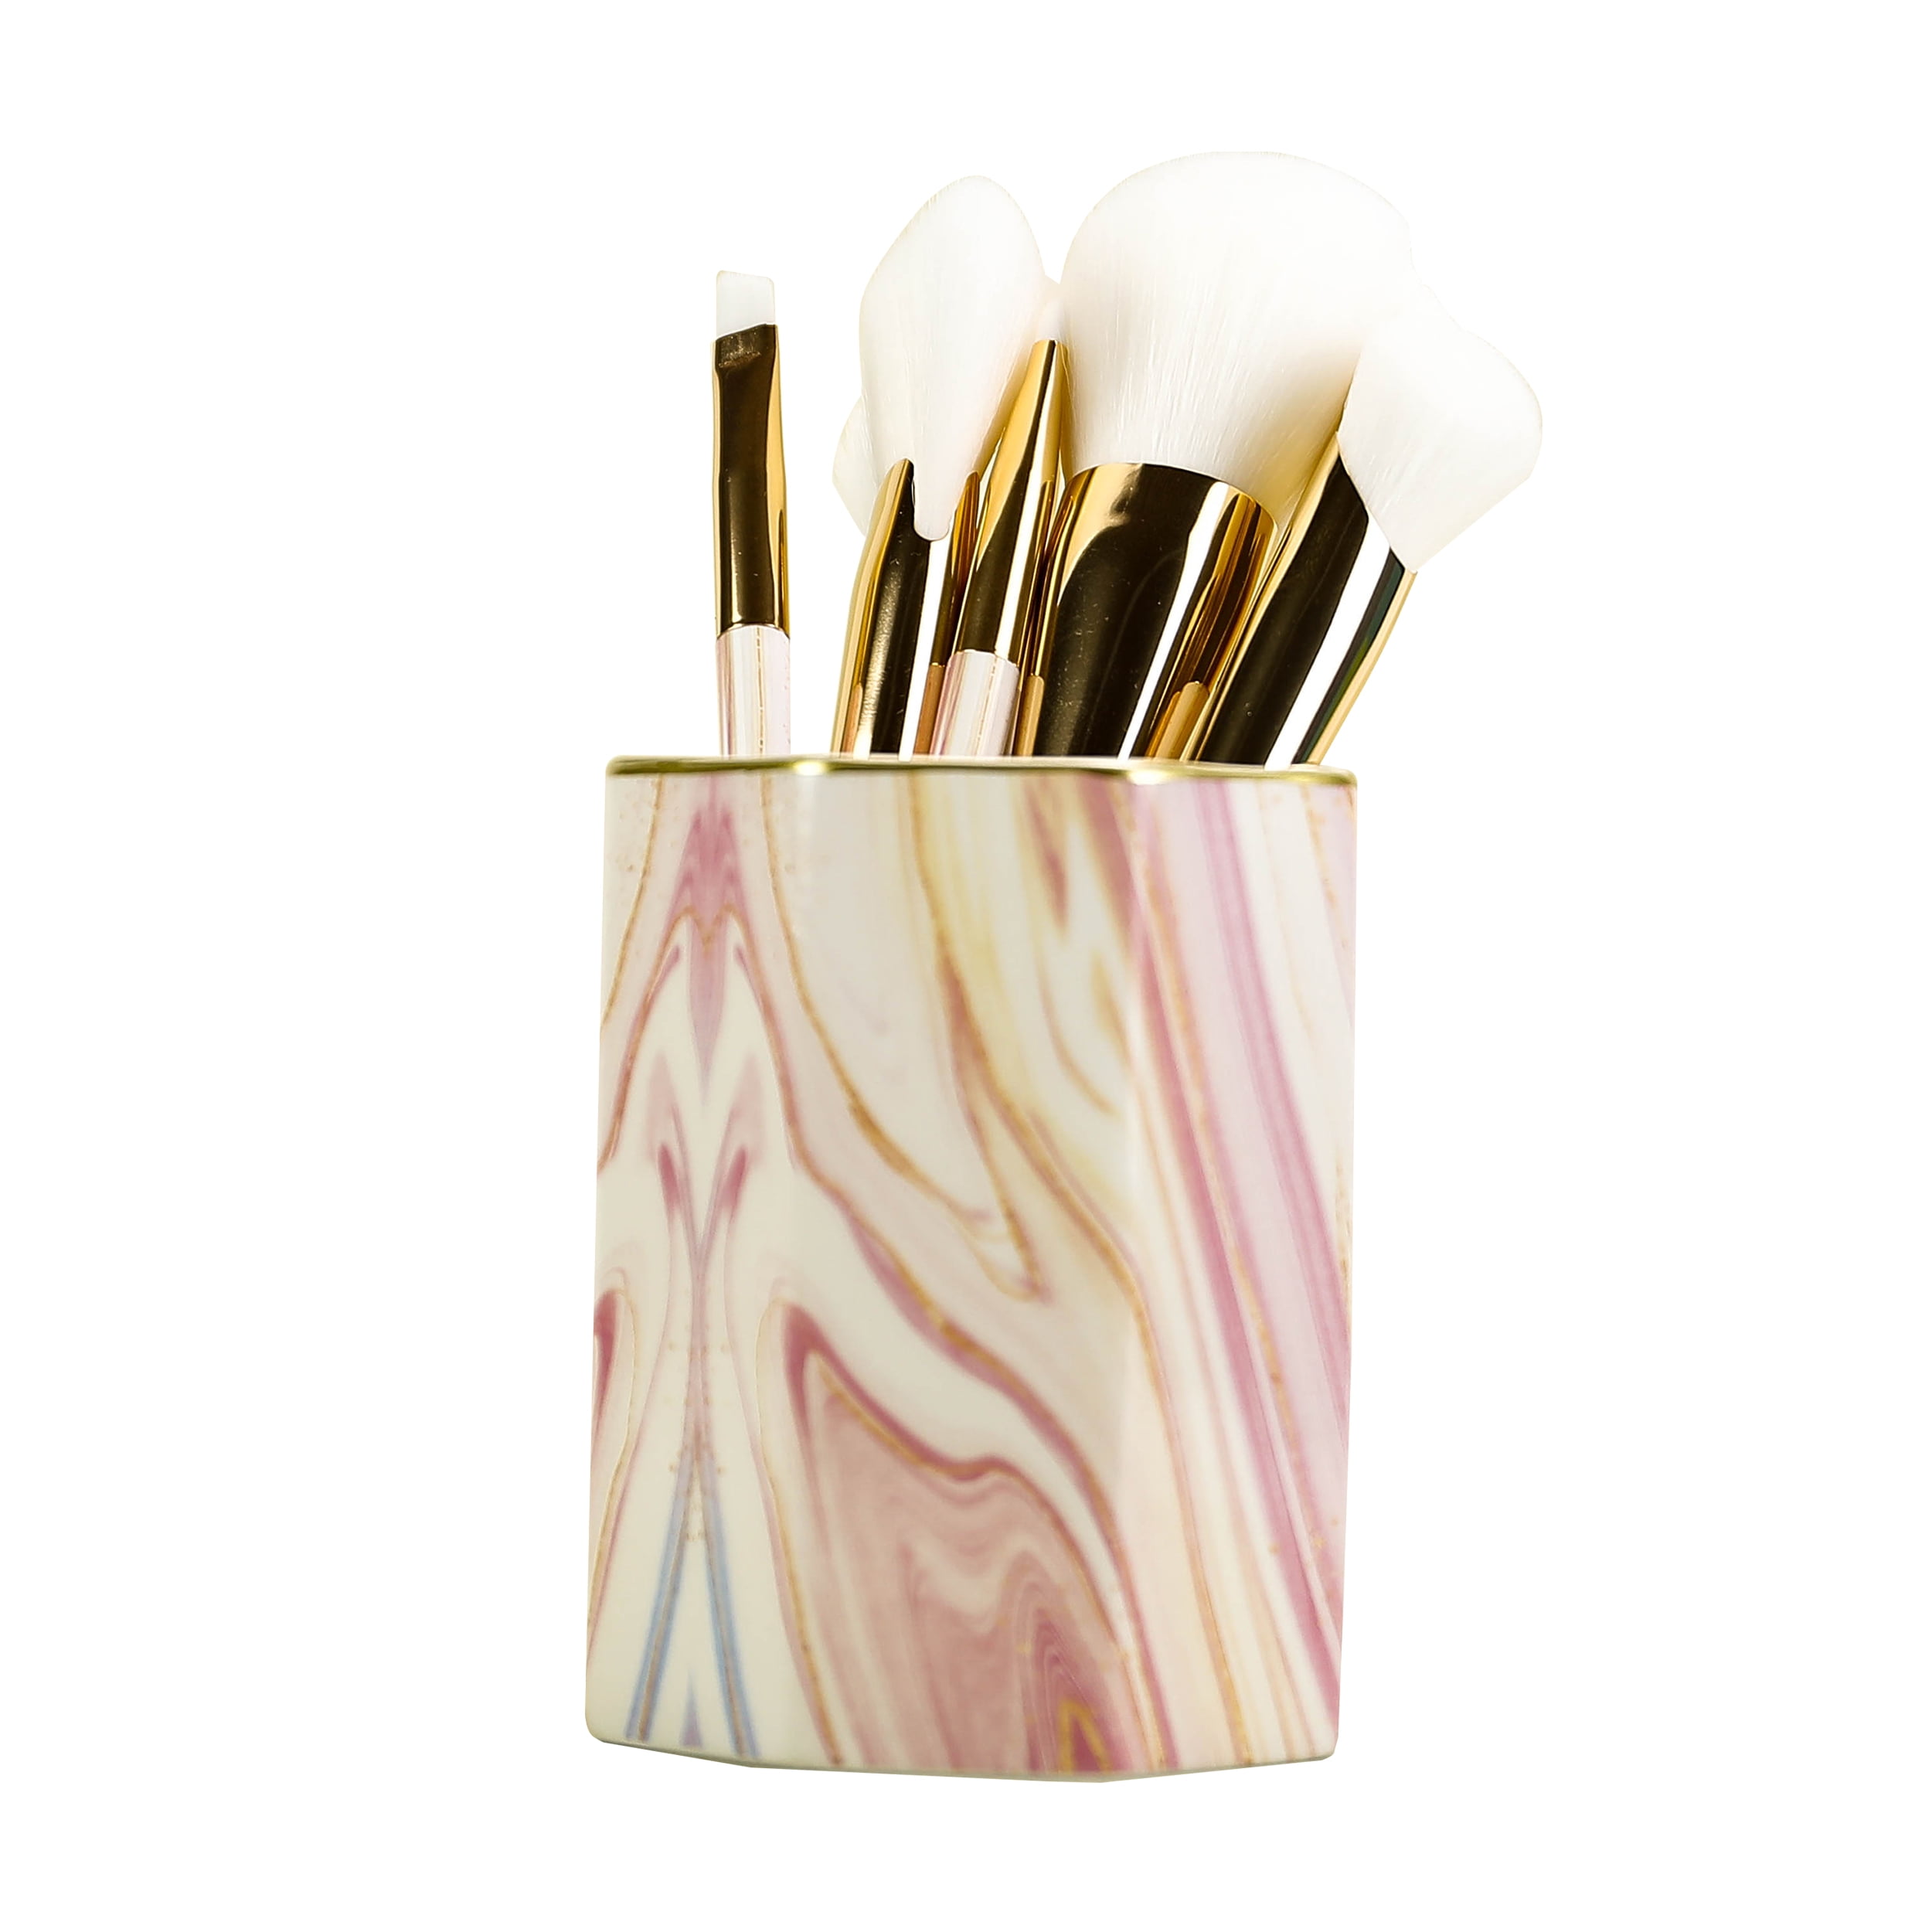 Special Edition Ceramic Brush Holder - Pink - Unique Shopping for Artistic  Gifts